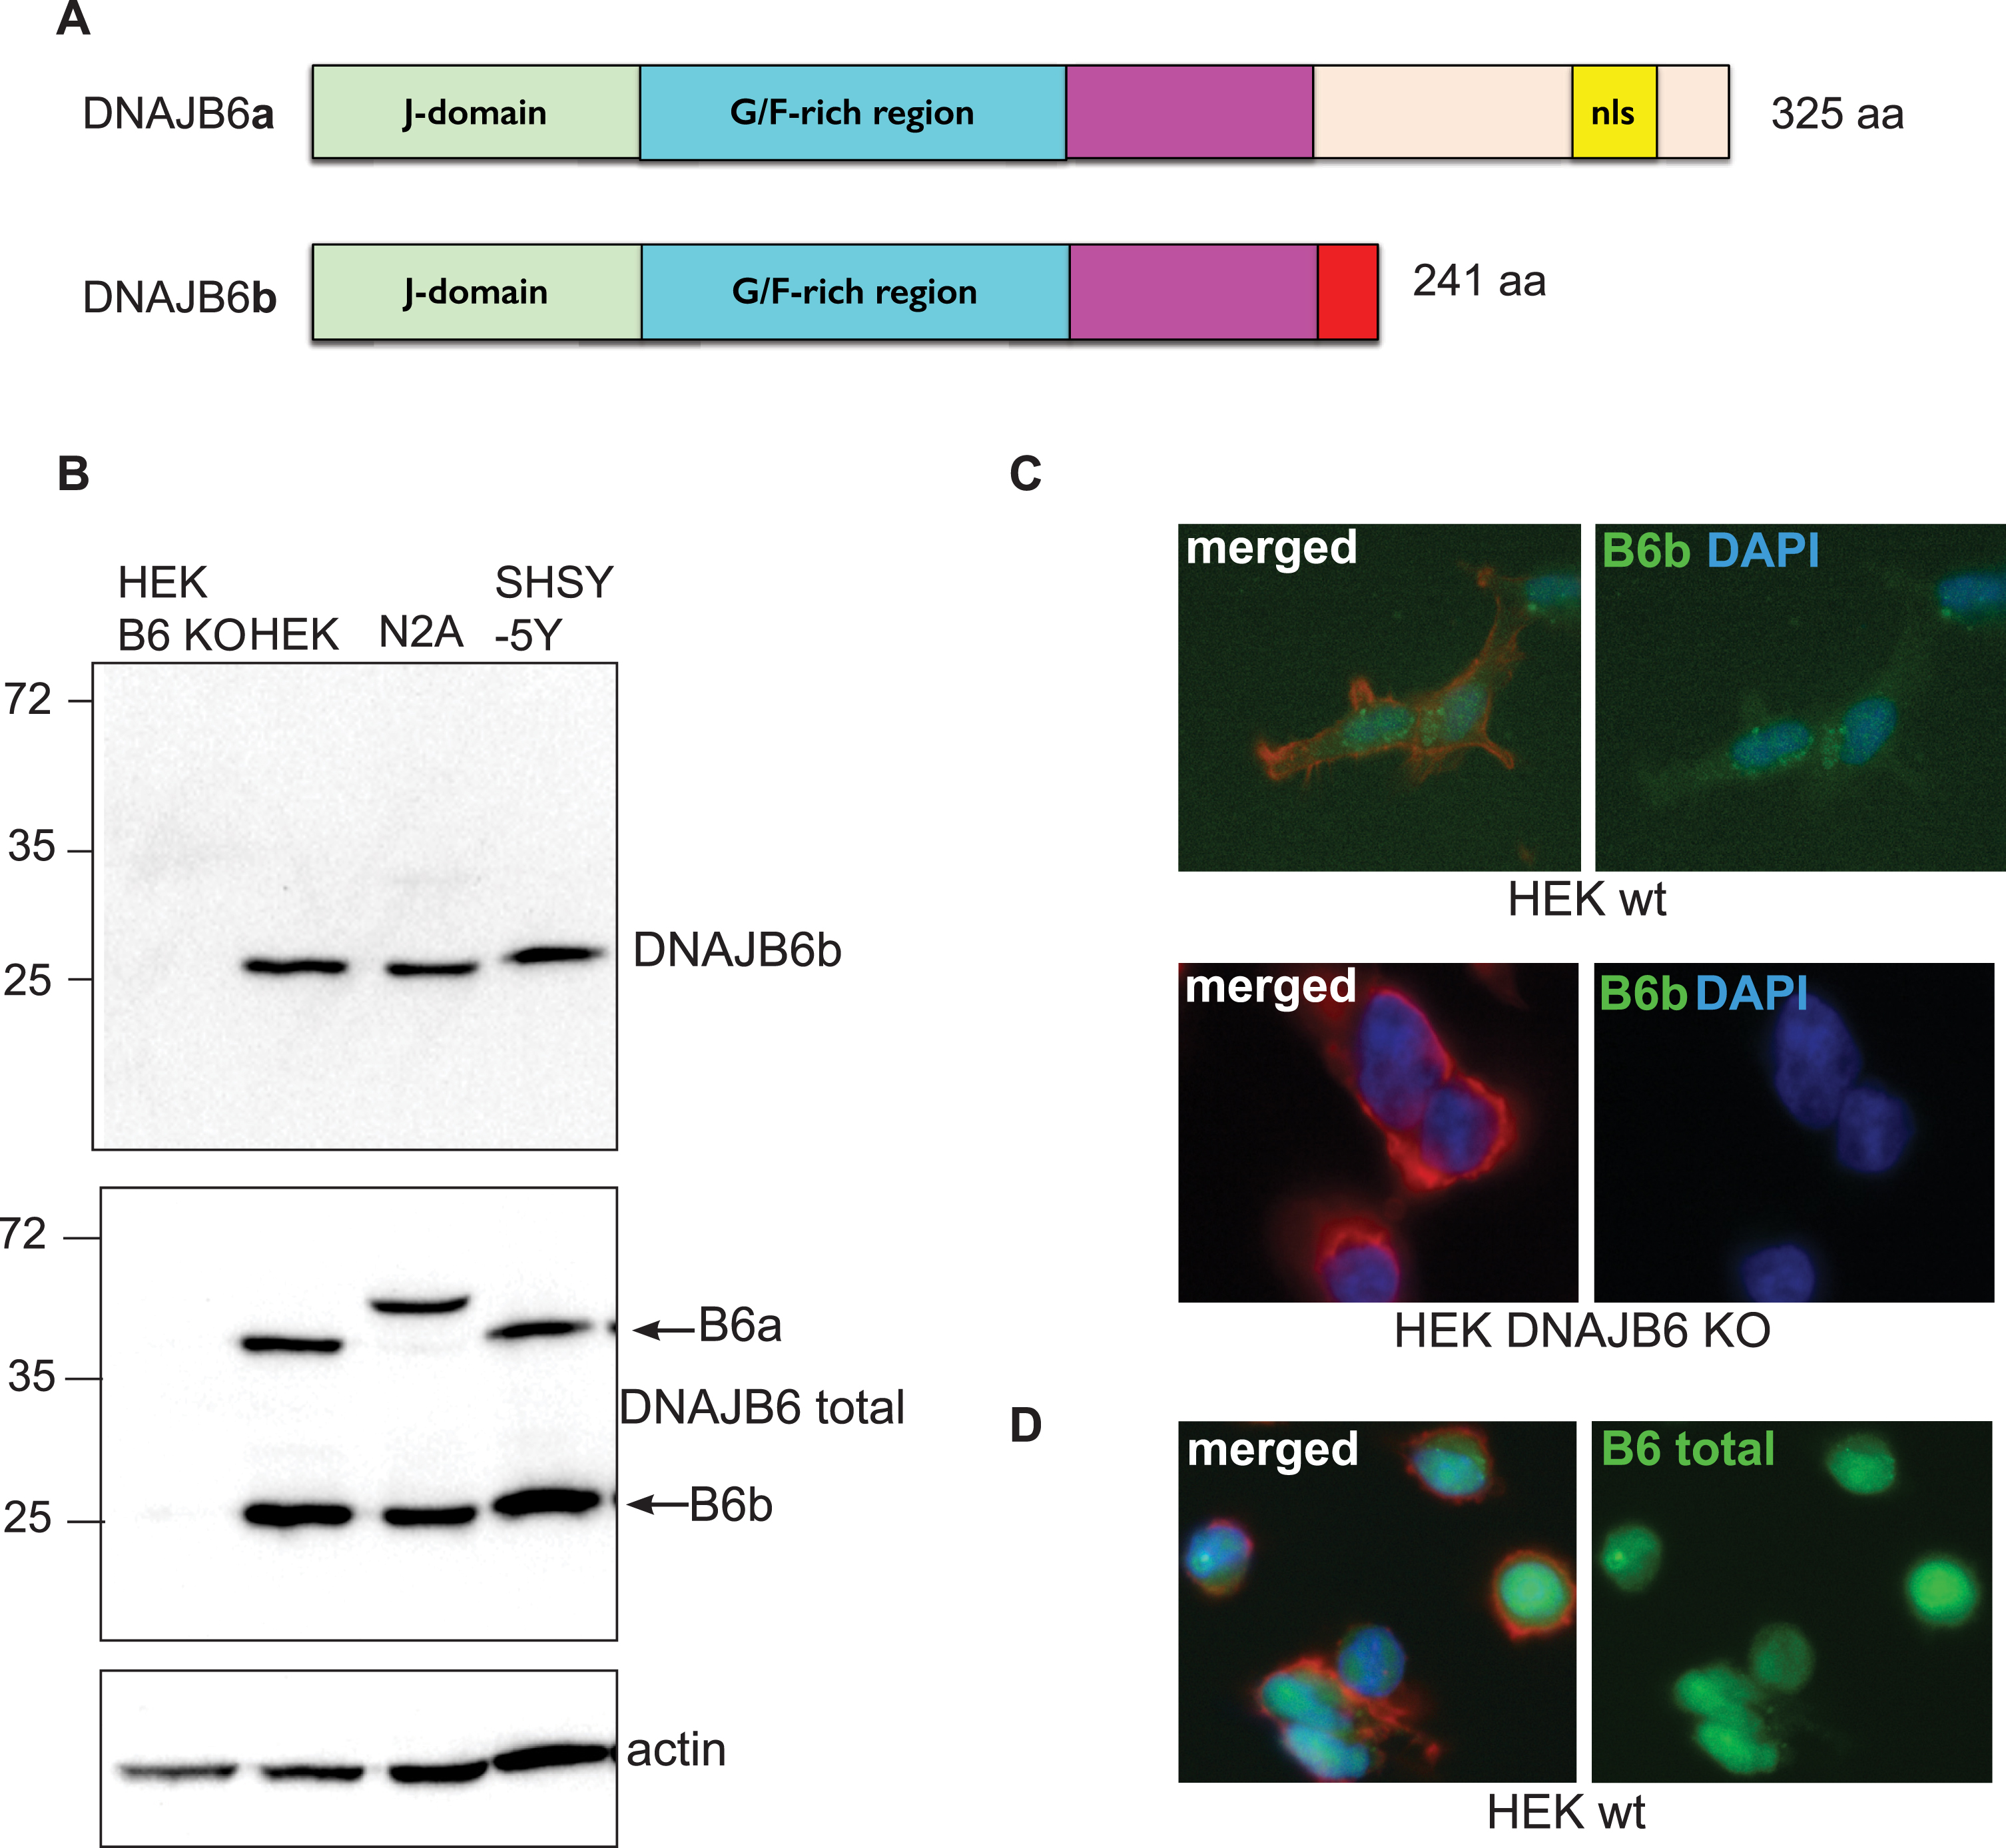 Expression of endogenous DNAJB6b as evaluated by western blot and immunocytochemistry. A) Illustration depicting the two major isoforms of DNAJB6 and their domains. nls, Nucleus Localization Signal. B) Expression of DNAJB6b in lysates from cell lines, analyzed by probing membranes with anti-DNAJB6b and HRP conjugated anti-rabbit antibodies. The membrane was probed with anti-total DNAJB6 and anti-actin as a control. C) DNAJB6 KO HEK 293 cells or wt HEK293 cells were probed with anti-DNAJB6b antibody, phalloidin-Alexa 547 as well as secondary anti-rabbit Alexa 488 coupled antibody. D) wt HEK293 cells were probed with anti- total DNAJB6 antibody, phalloidin-alexa 547 as well as secondary anti-rabbit alexa 488 coupled antibody.